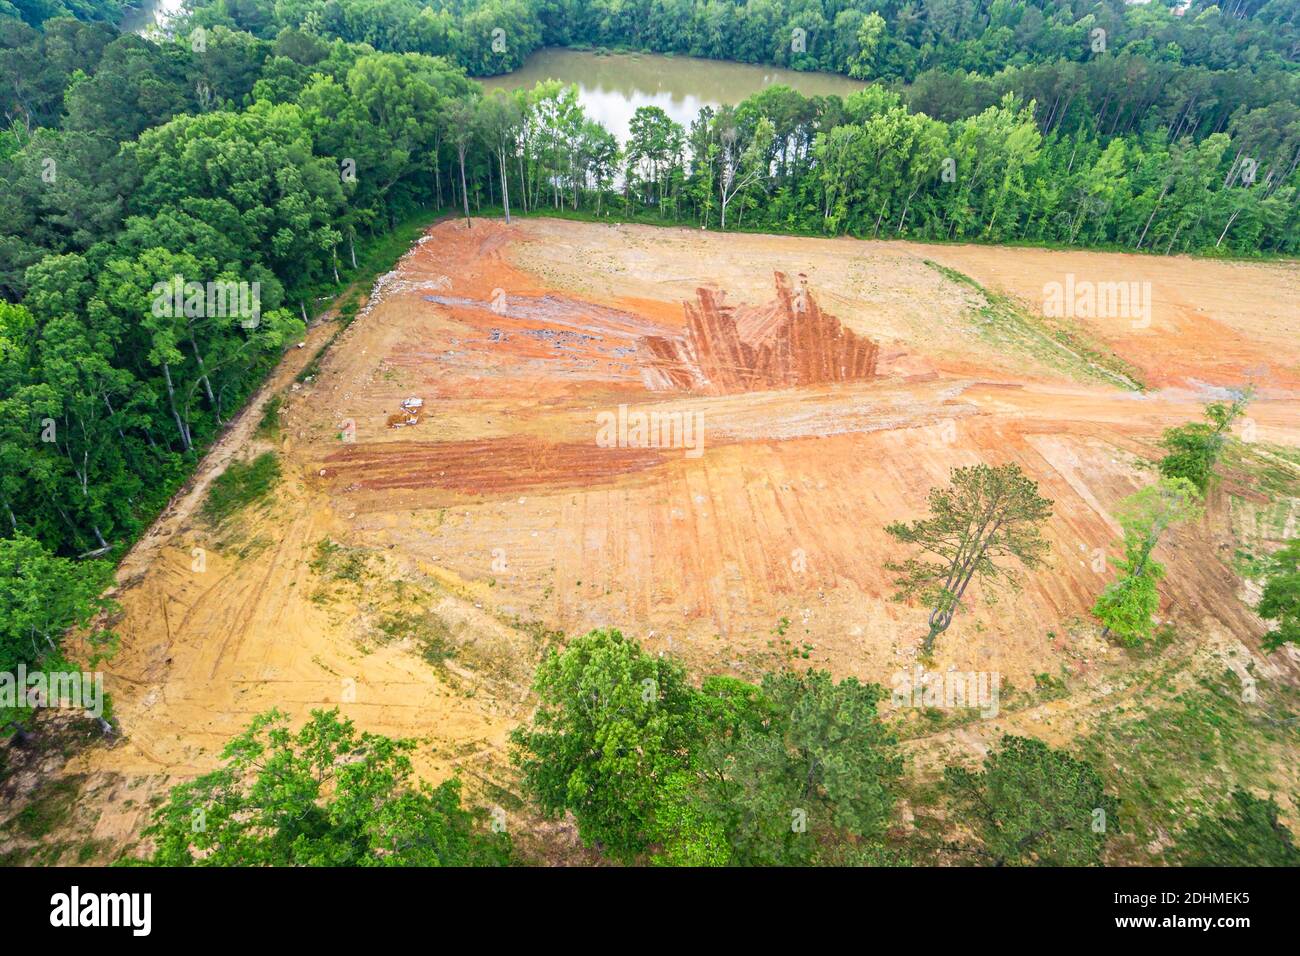 Alabama Decatur cleared land surrounded by trees,aerial view, Stock Photo